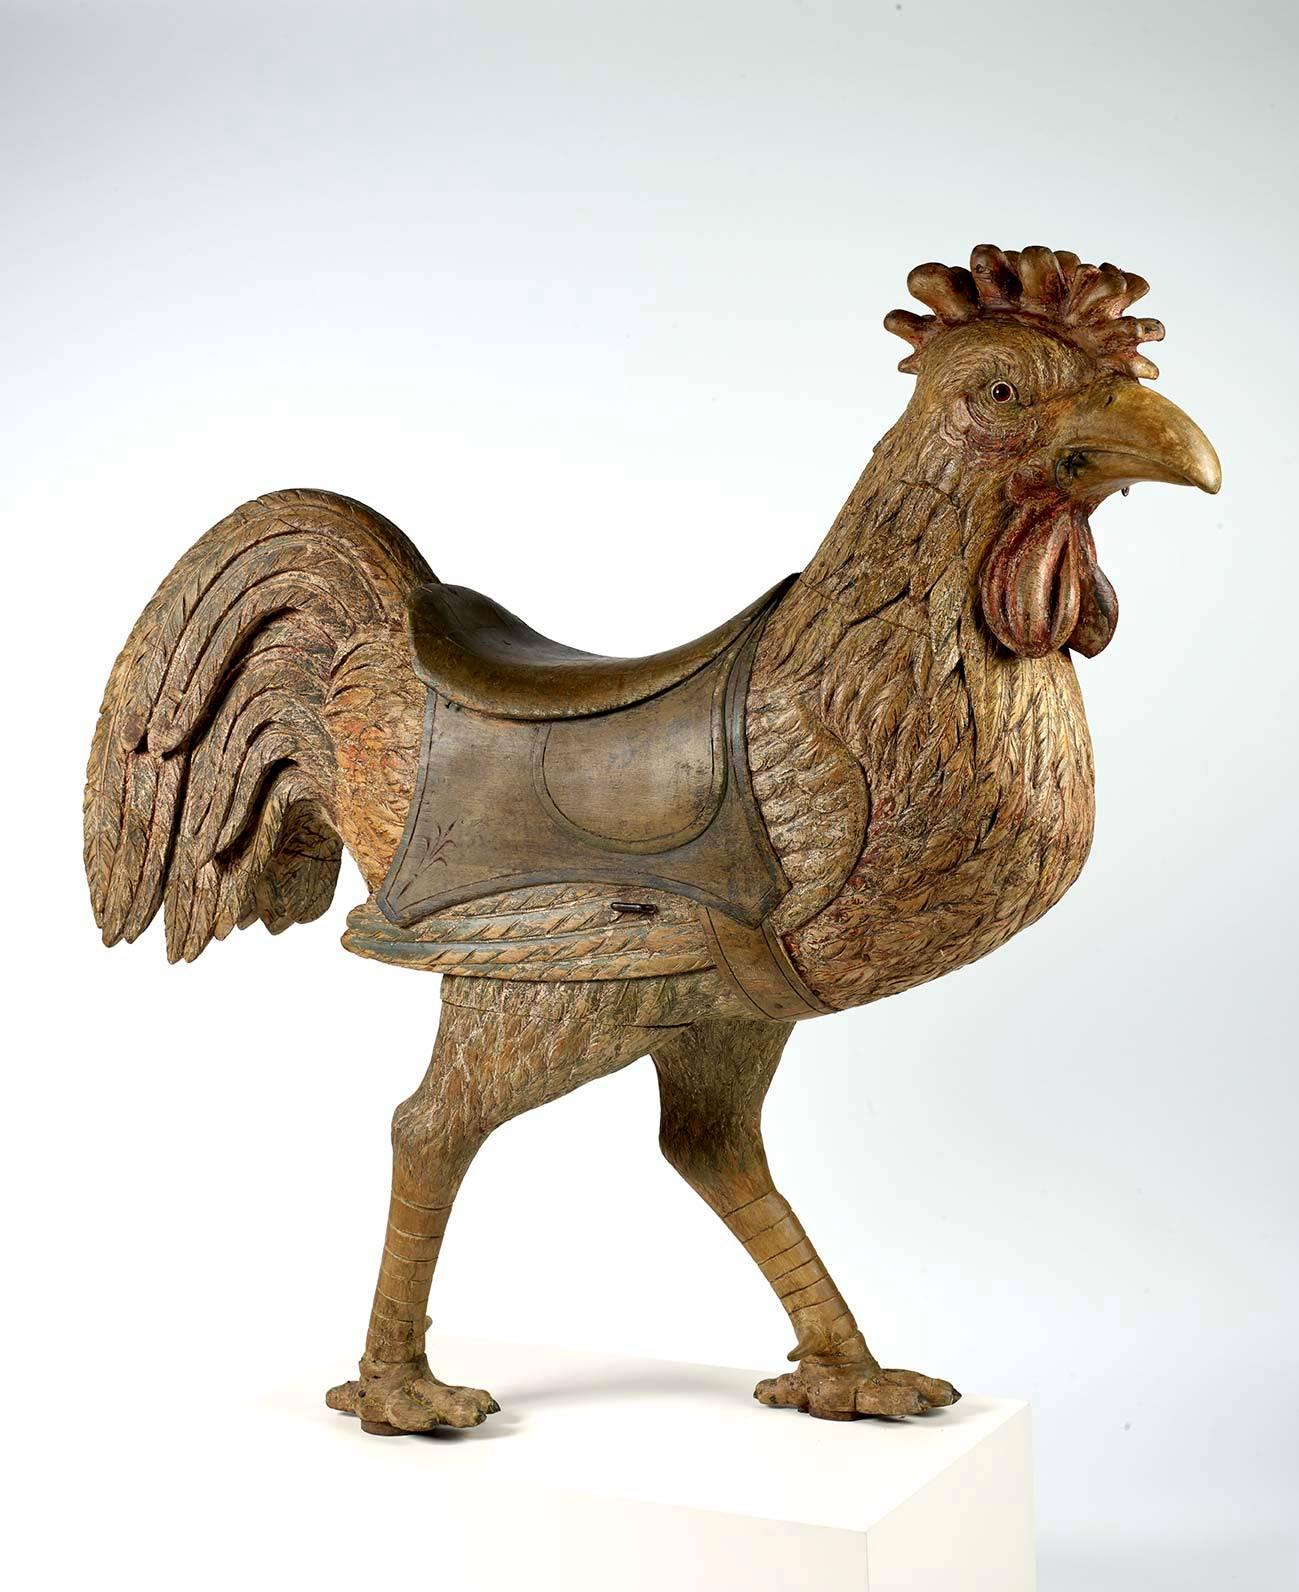 A rare polychrome-decorated and carved basswood carousel rooster figure by the Dentzel Company of Philadelphia. There are approximately six large Dentzel carousel roosters known to exist. This one surfaced locally in the 1970s and at this time we do